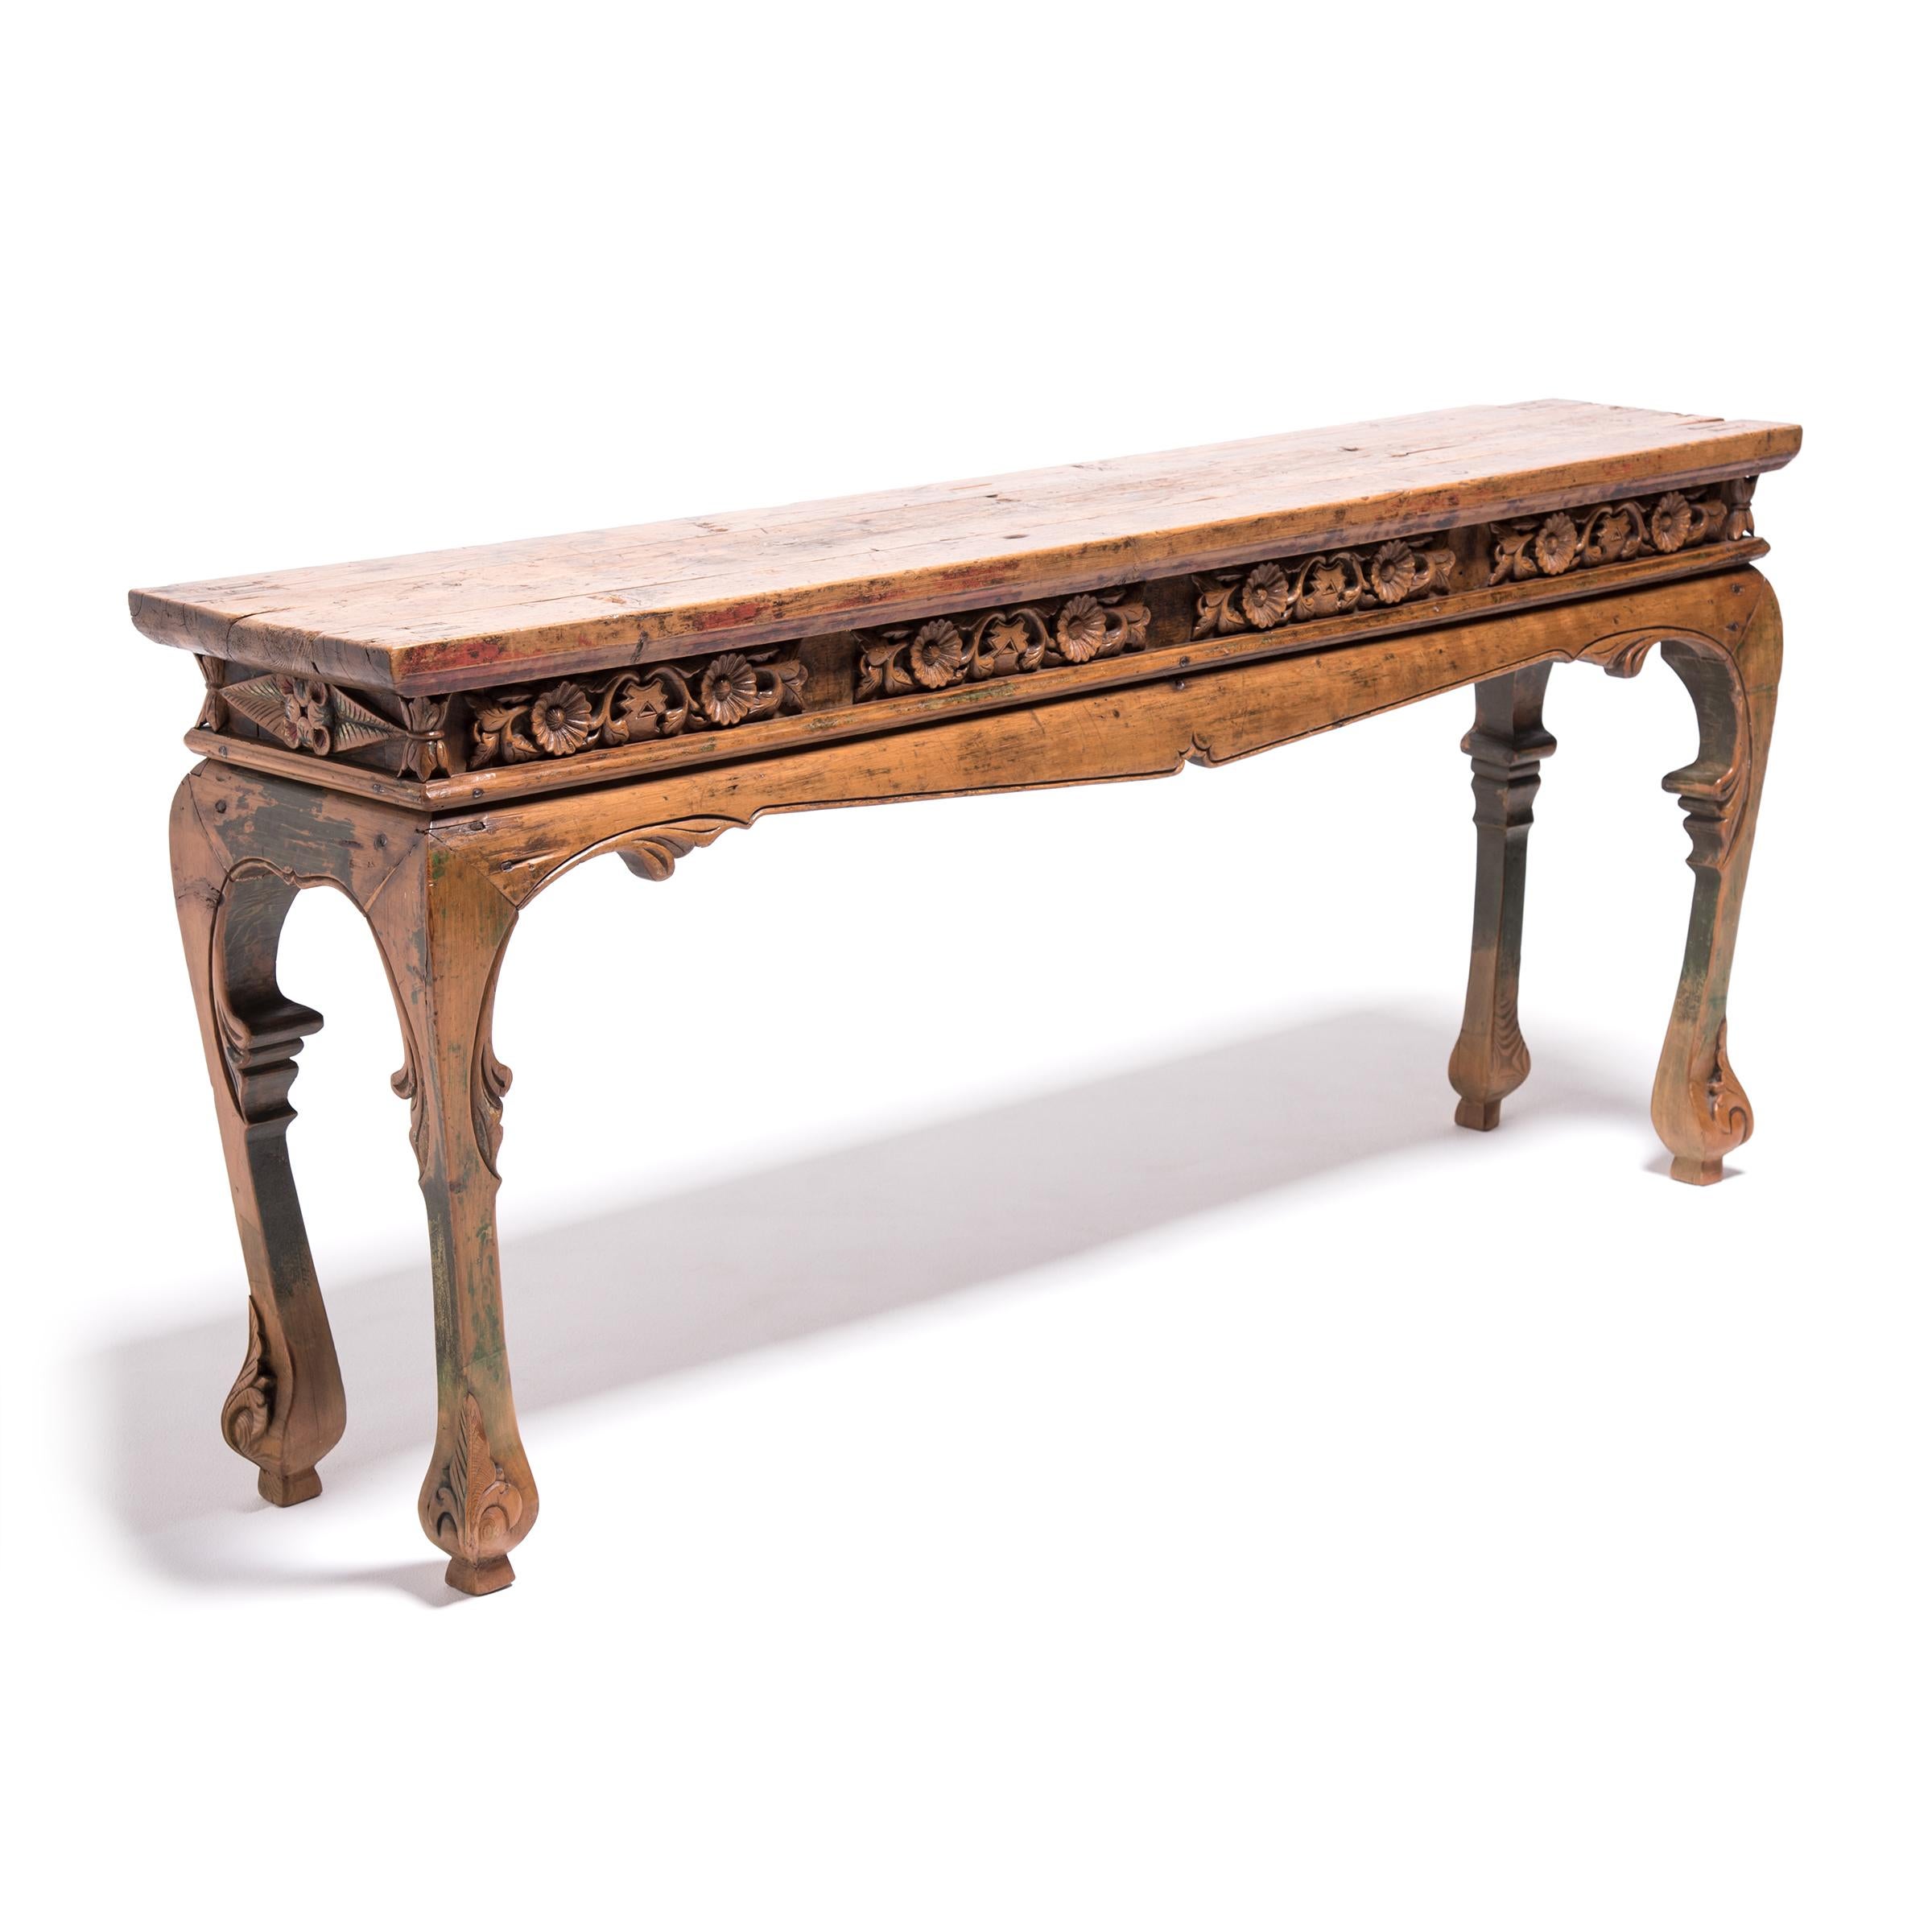 Hand-Carved 19th Century Chinese Ornate Chrysanthemum Table